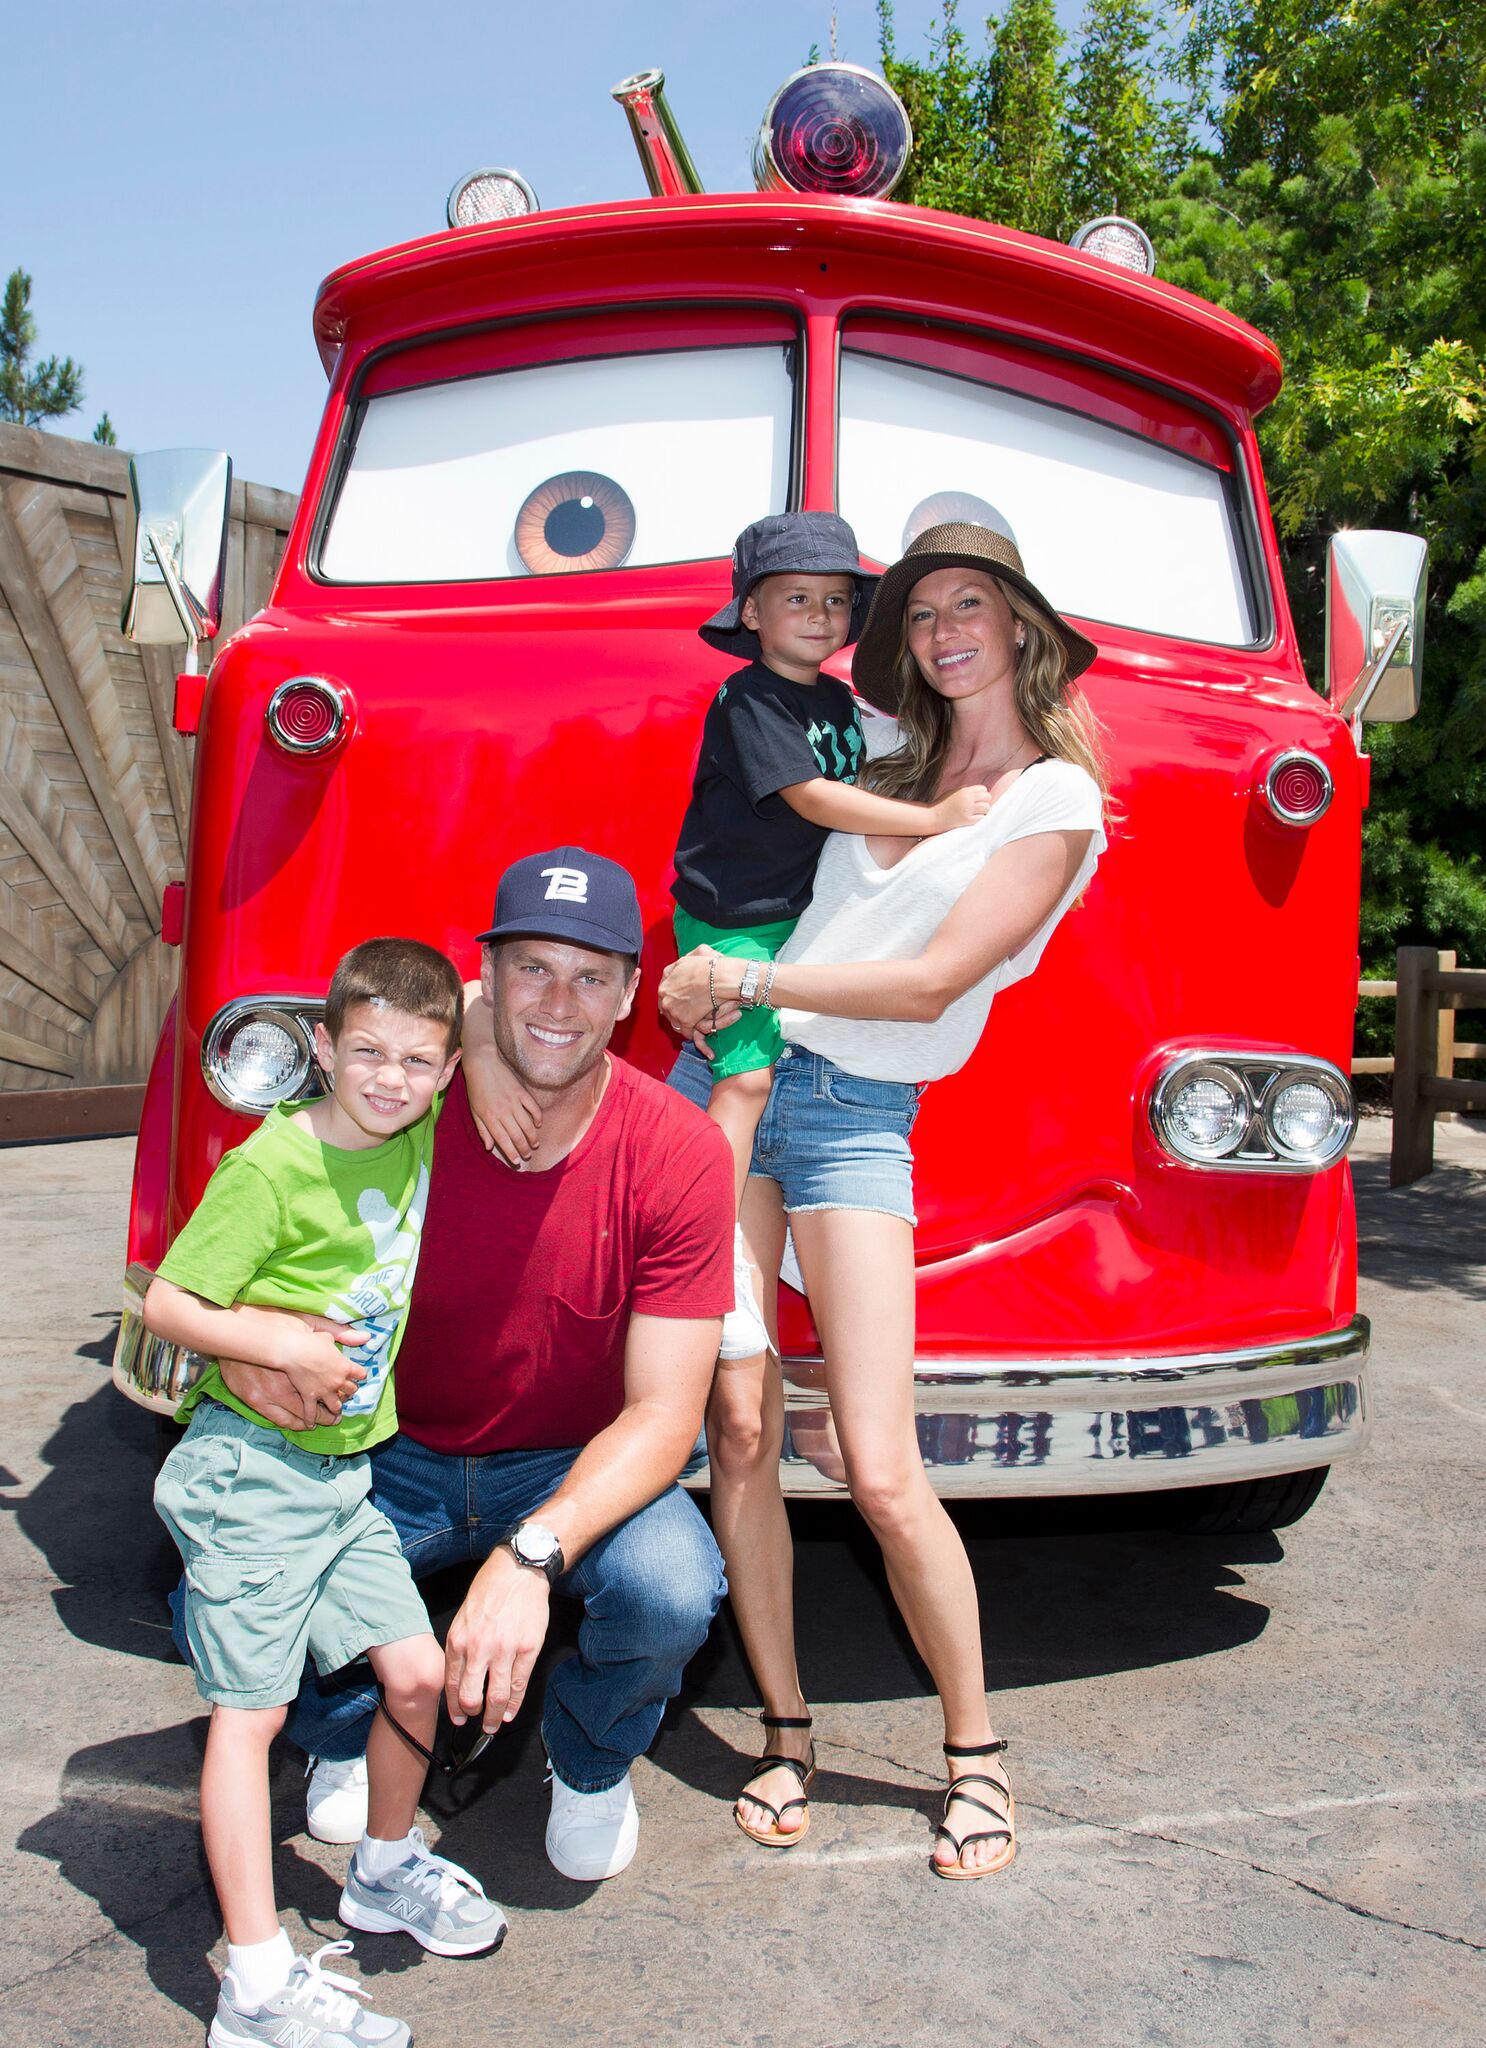  Tom Brady, his son Jack, 5, Gisele Bundchen, and their son Benjamin, 3, pose with Red the Fire Truck at Cars Land at Disney California Adventure park July 2, 2013  | Getty Images